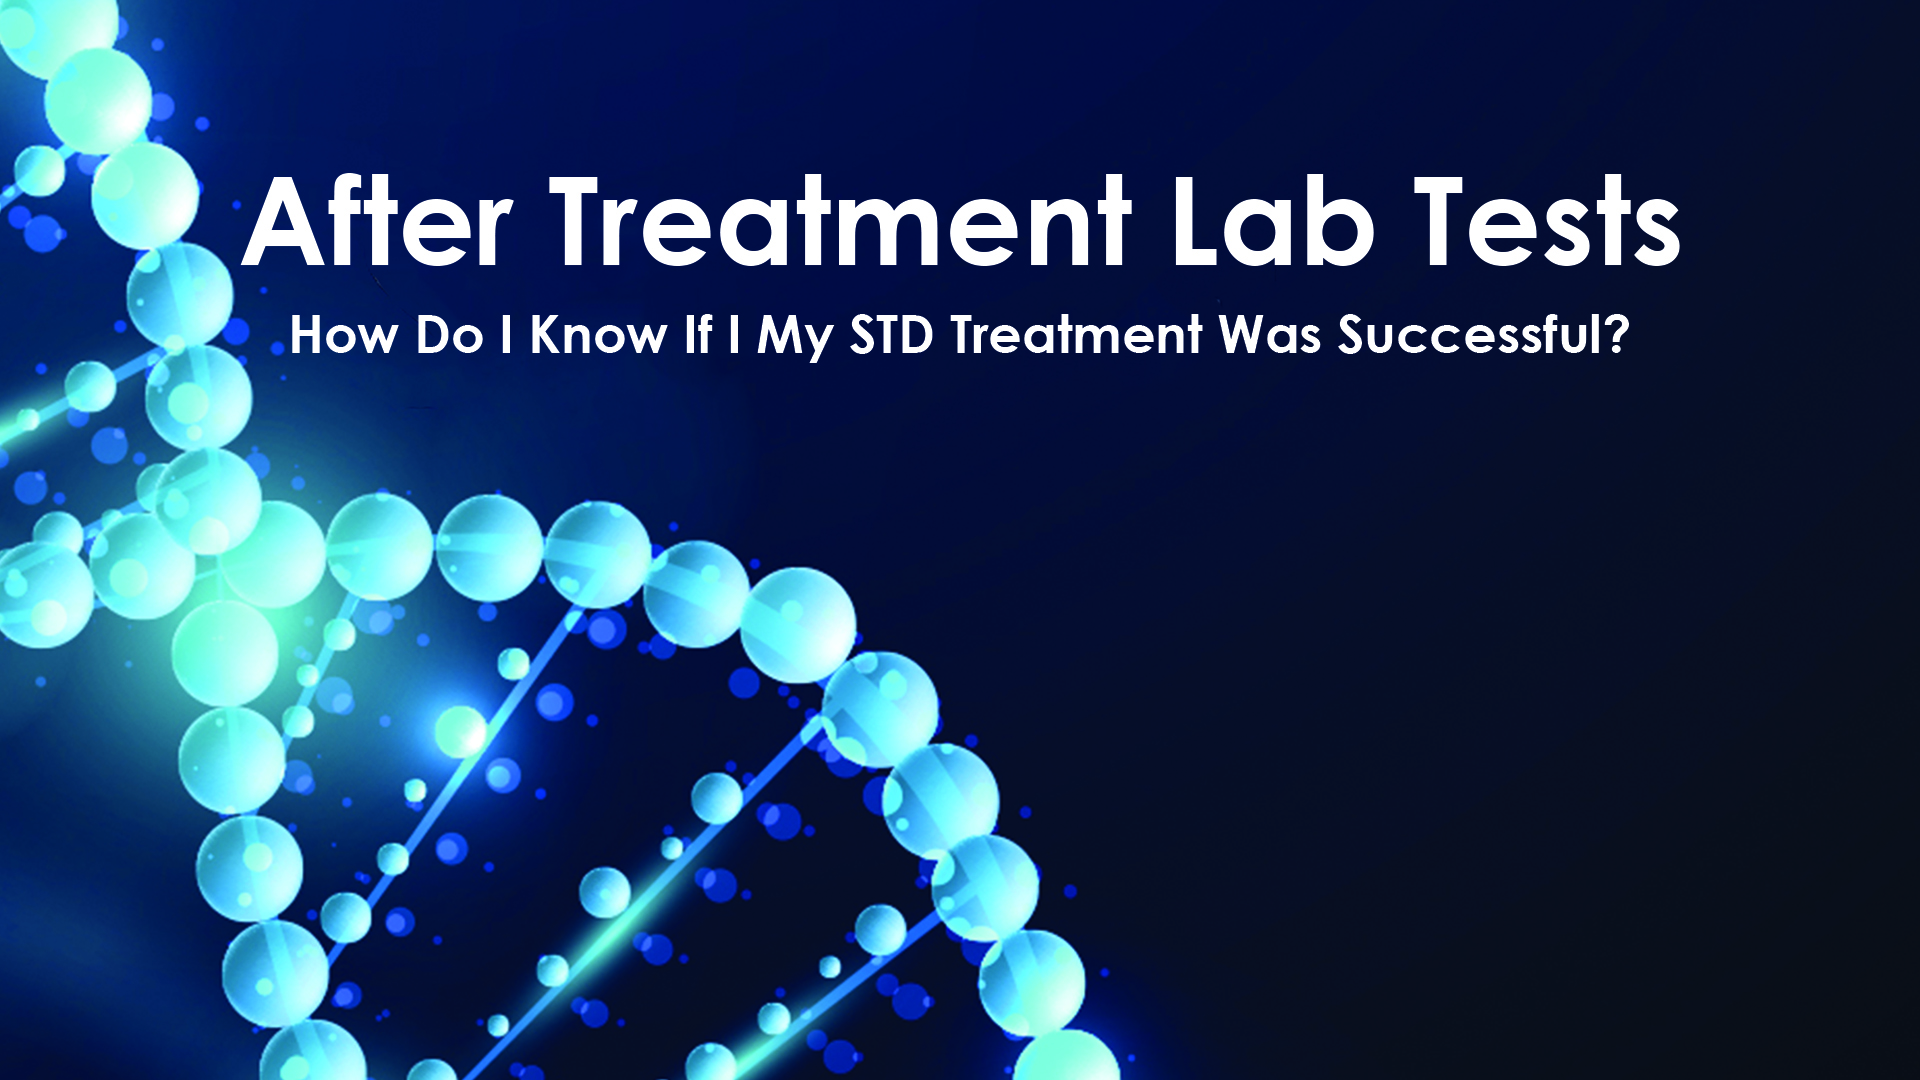 After Treatment Lab Tests - How Do I Know If I My STD Treatment Was Successful?